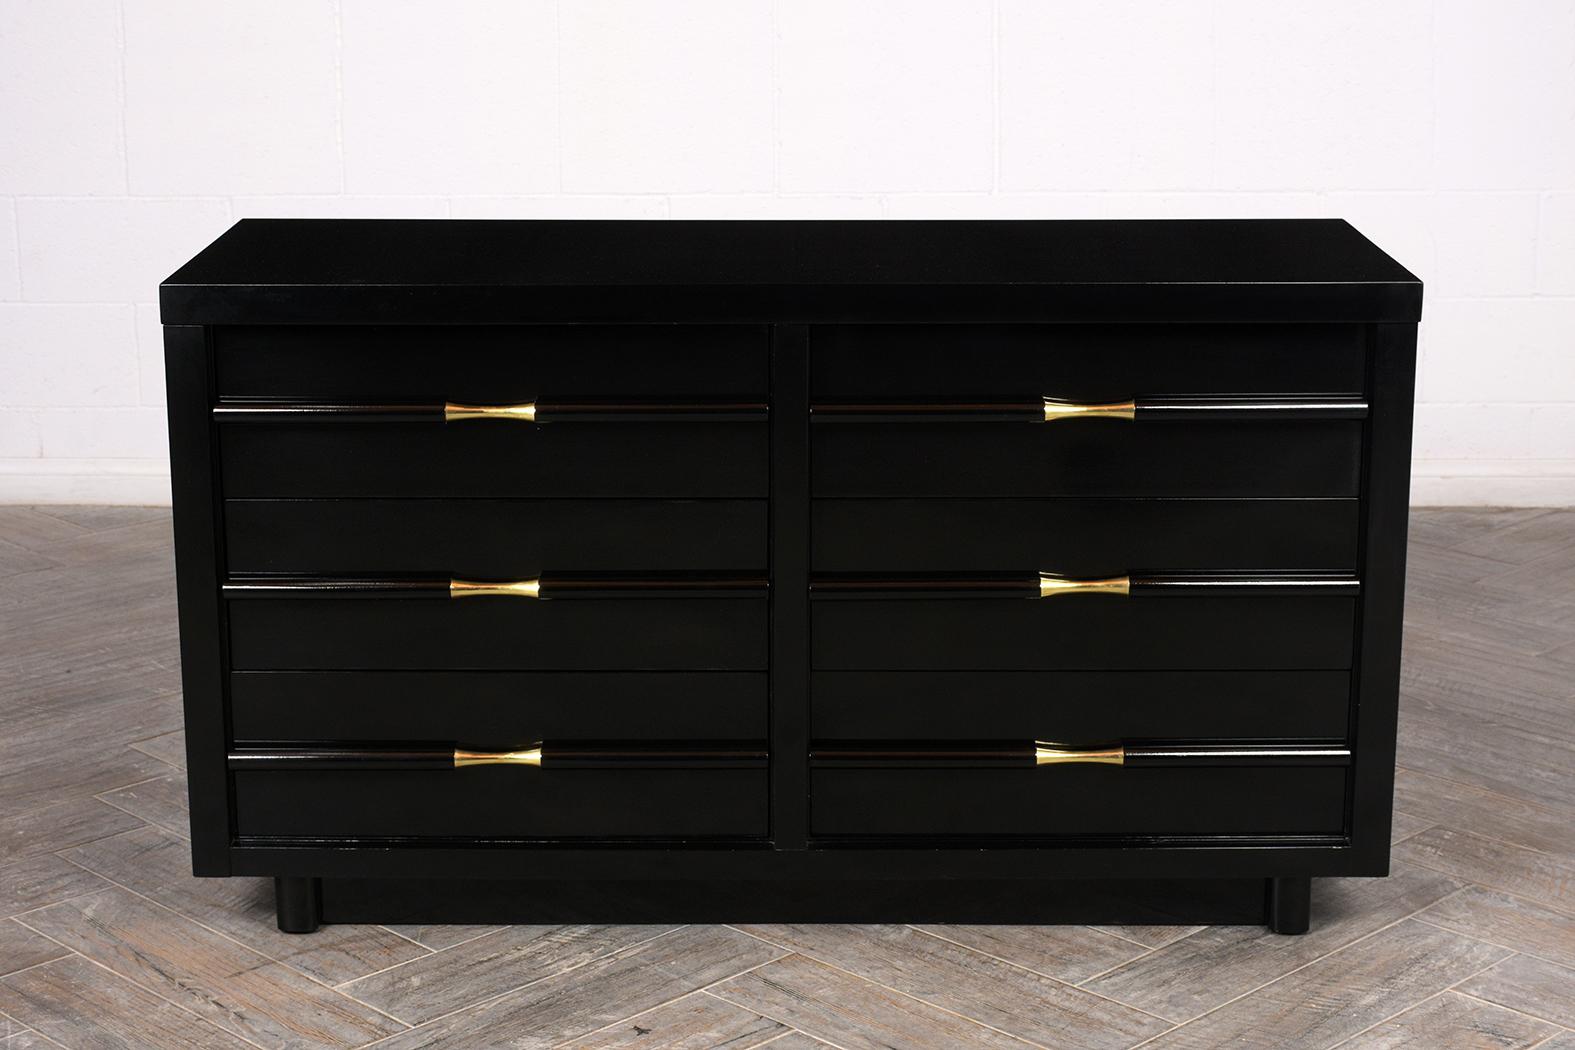 This Mid-Century Modern maple wood chest of drawers has been completed restored have a newly black lacquered finish. It has six drawers a large carved wood handles with unique brass detail, this piece resting on a floating base. All the drawers are